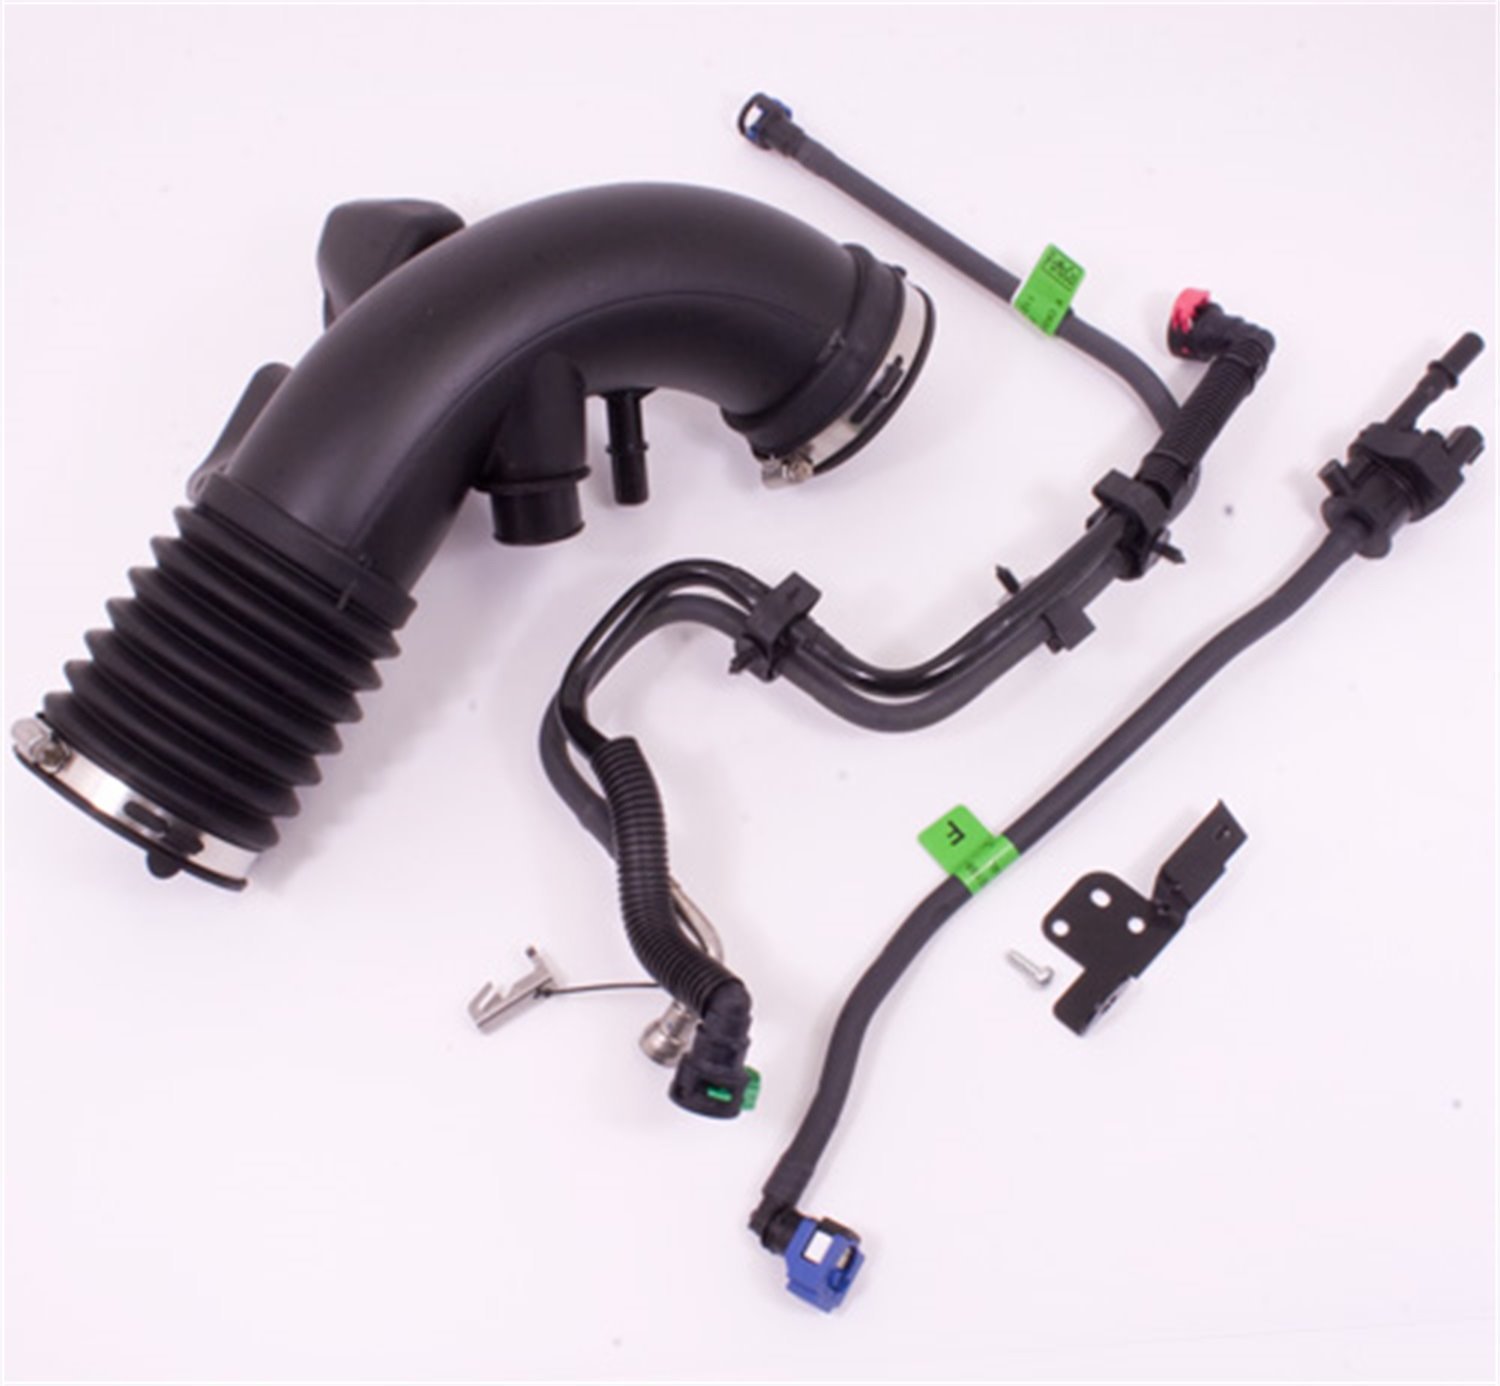 Intake Manifold Installation Kit All Required Parts To Mount M-9424-M50BR